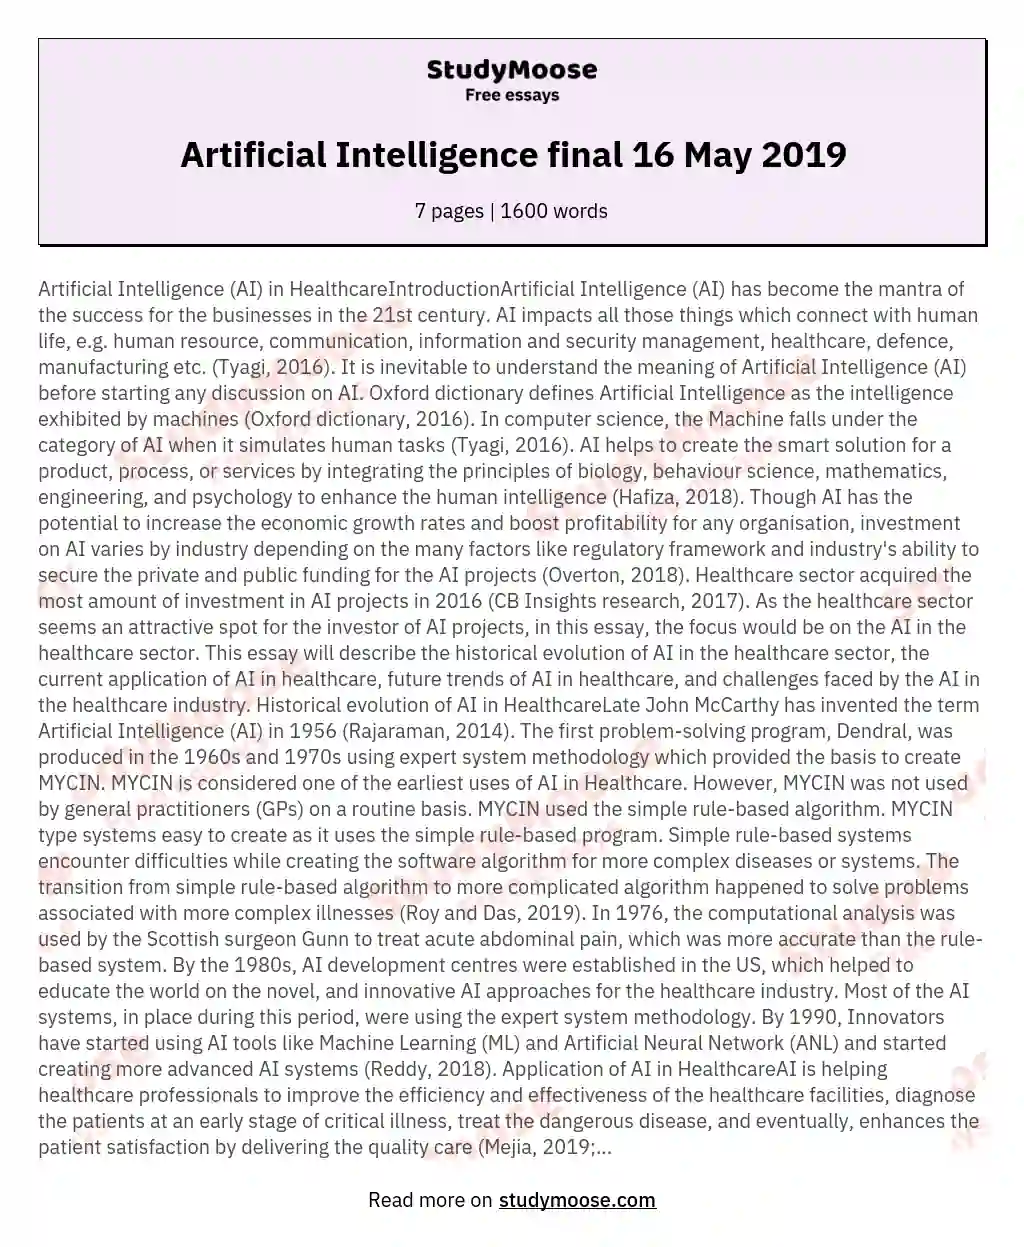 Artificial Intelligence final 16 May 2019